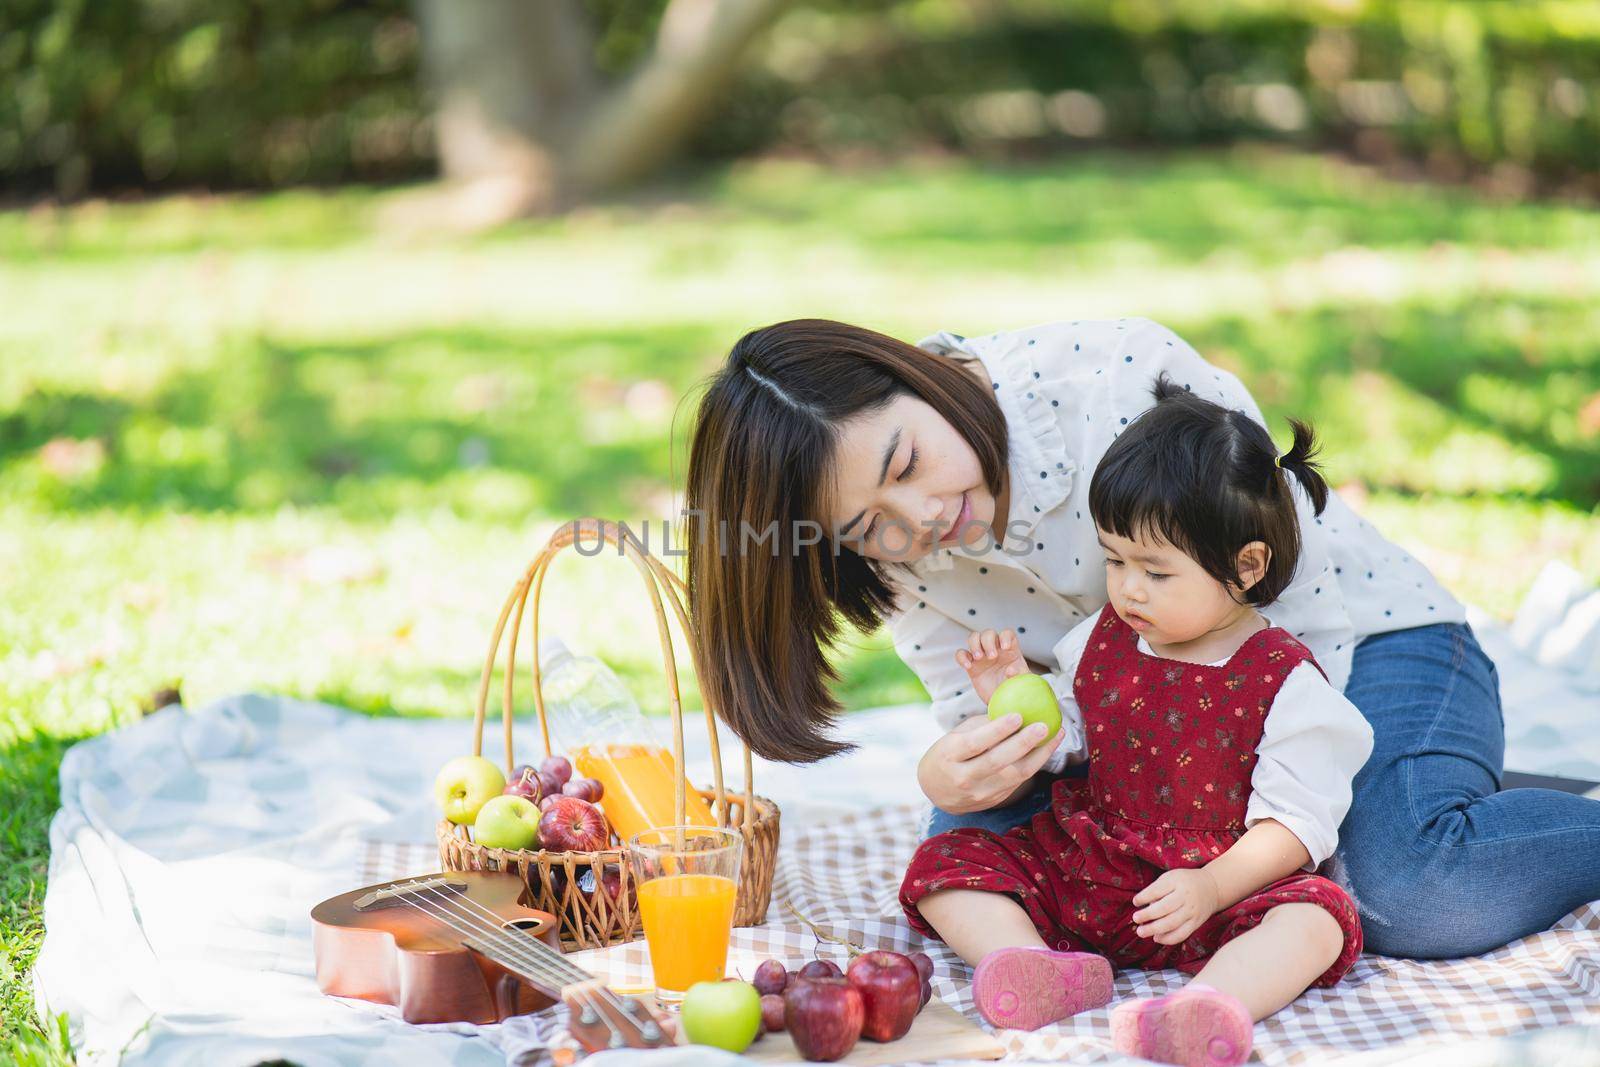 Family with children enjoying picnic in spring garden. Parents and kids having fun eating lunch outdoors in summer park.